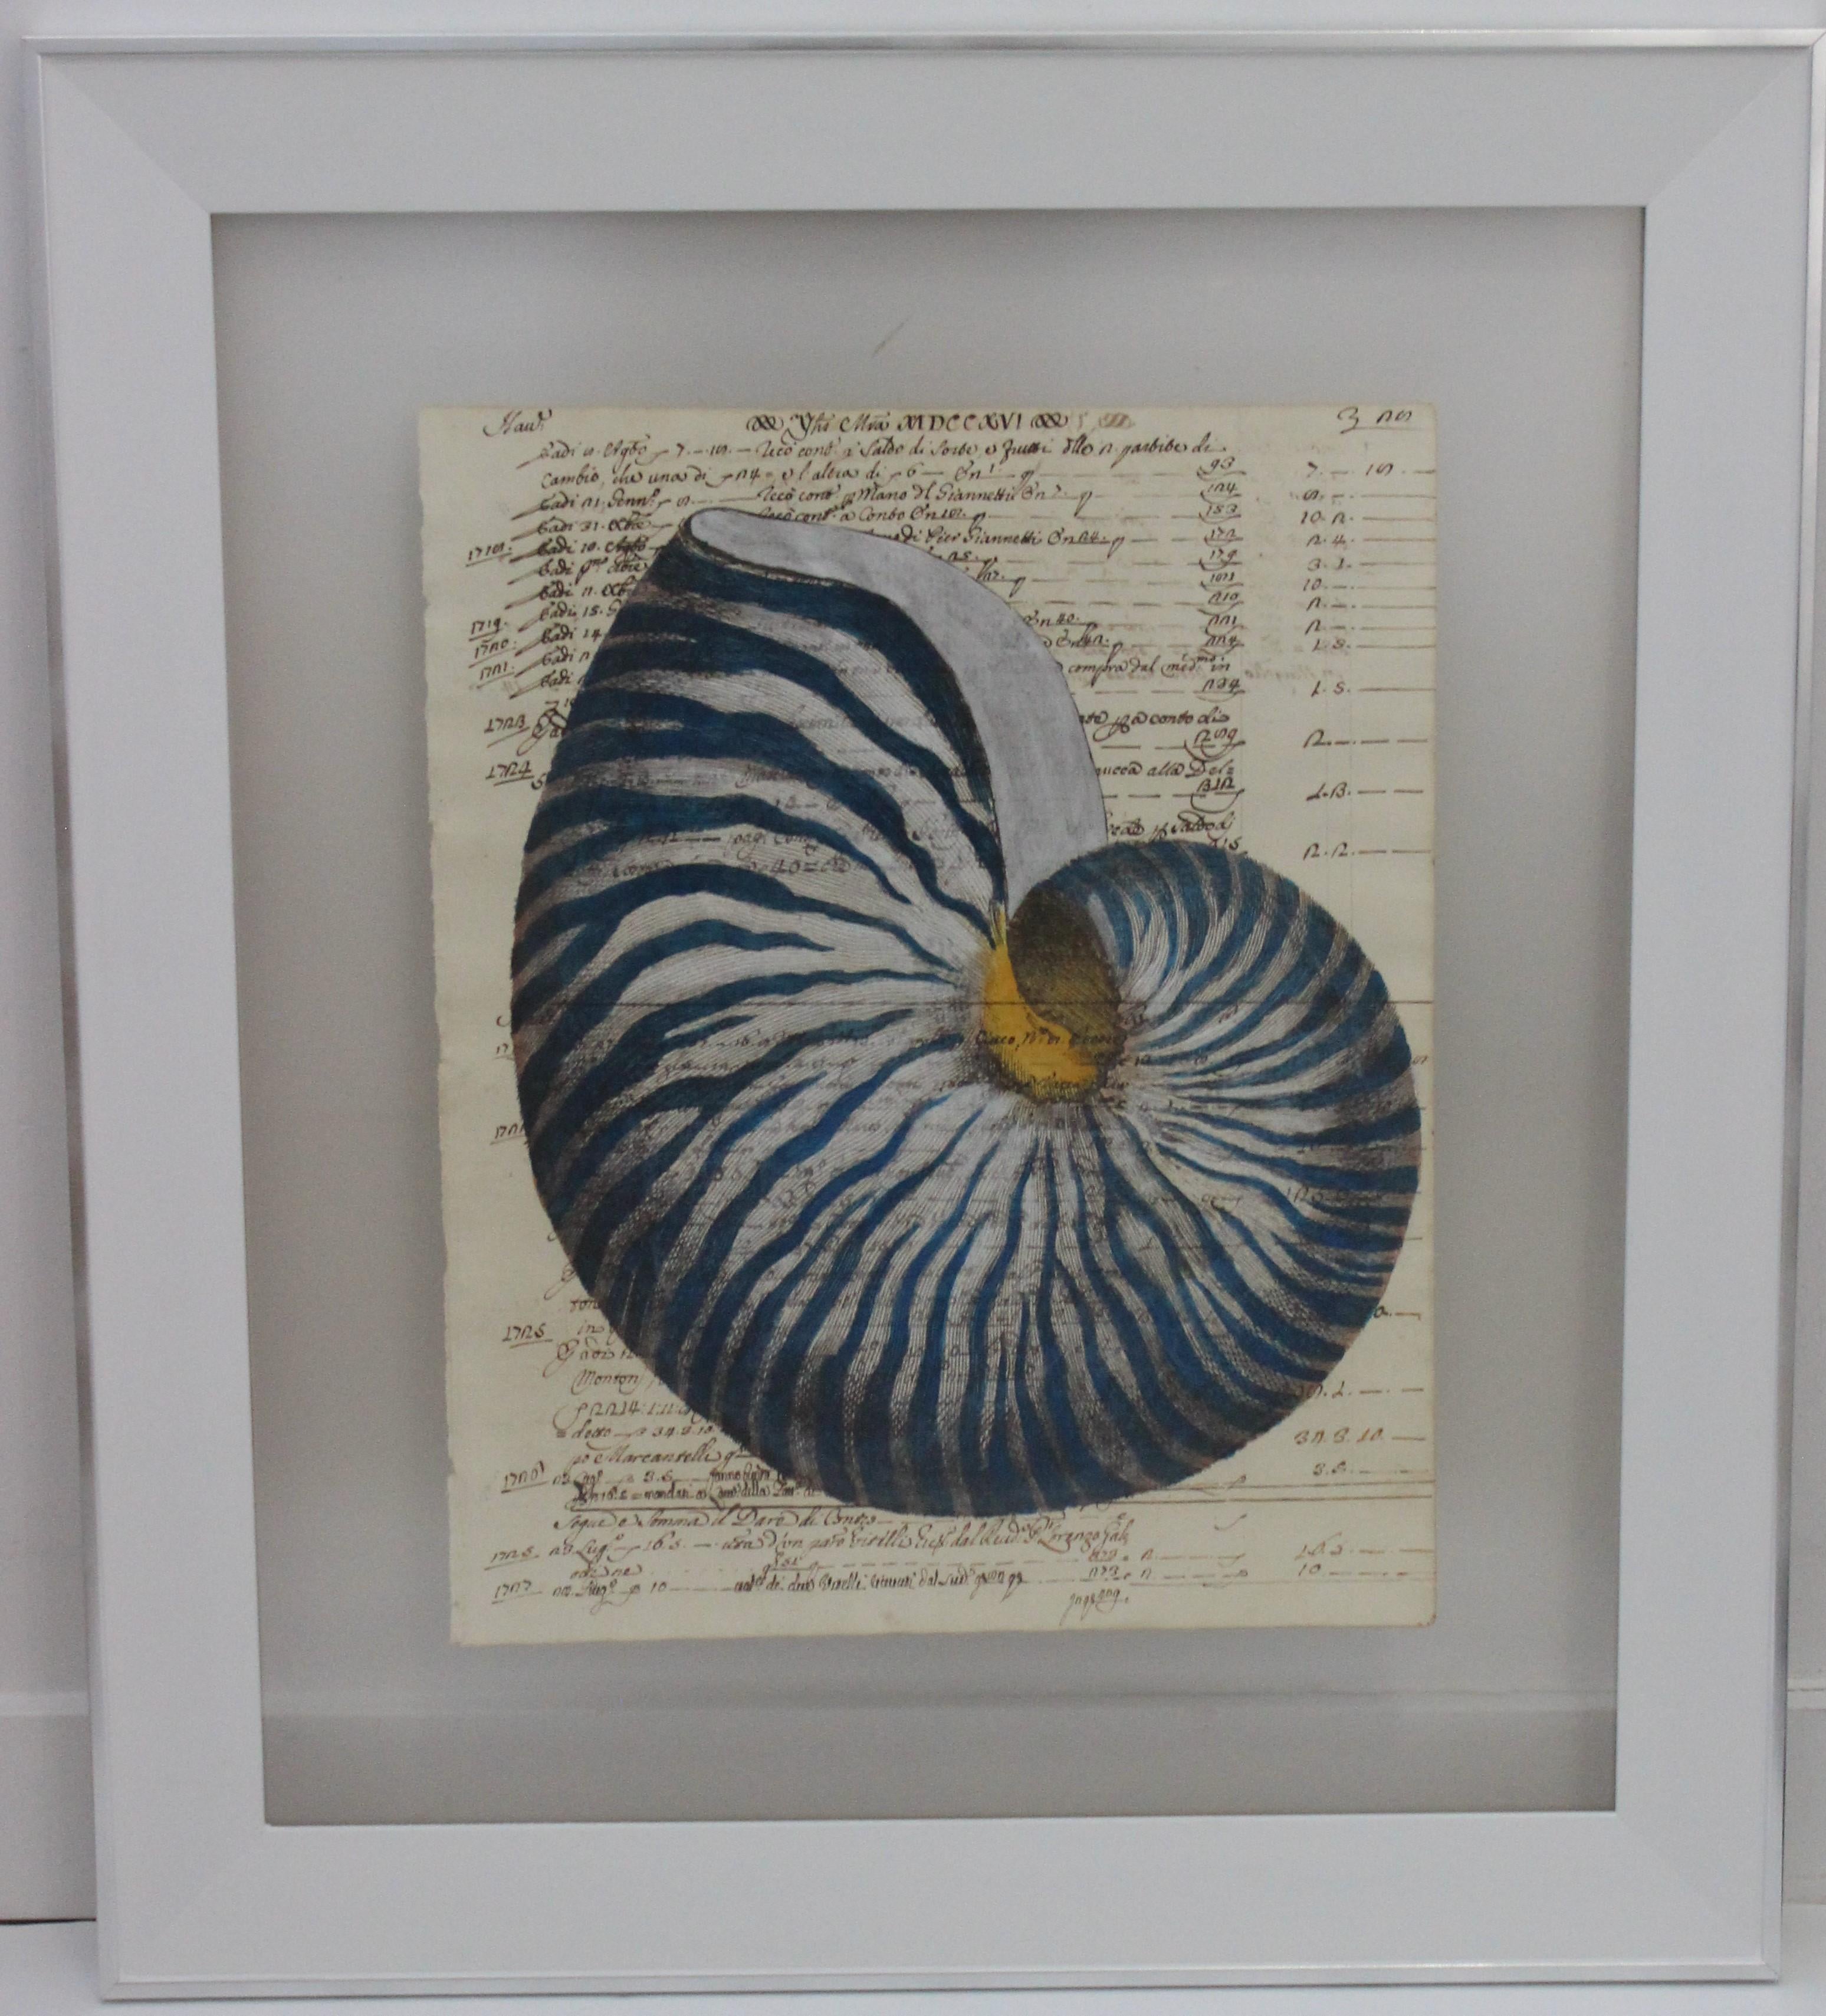 Hand painting of blue nautilus on circa 1719 manuscript paper framed with reversing view
Acquired from a Palm Beach estate.